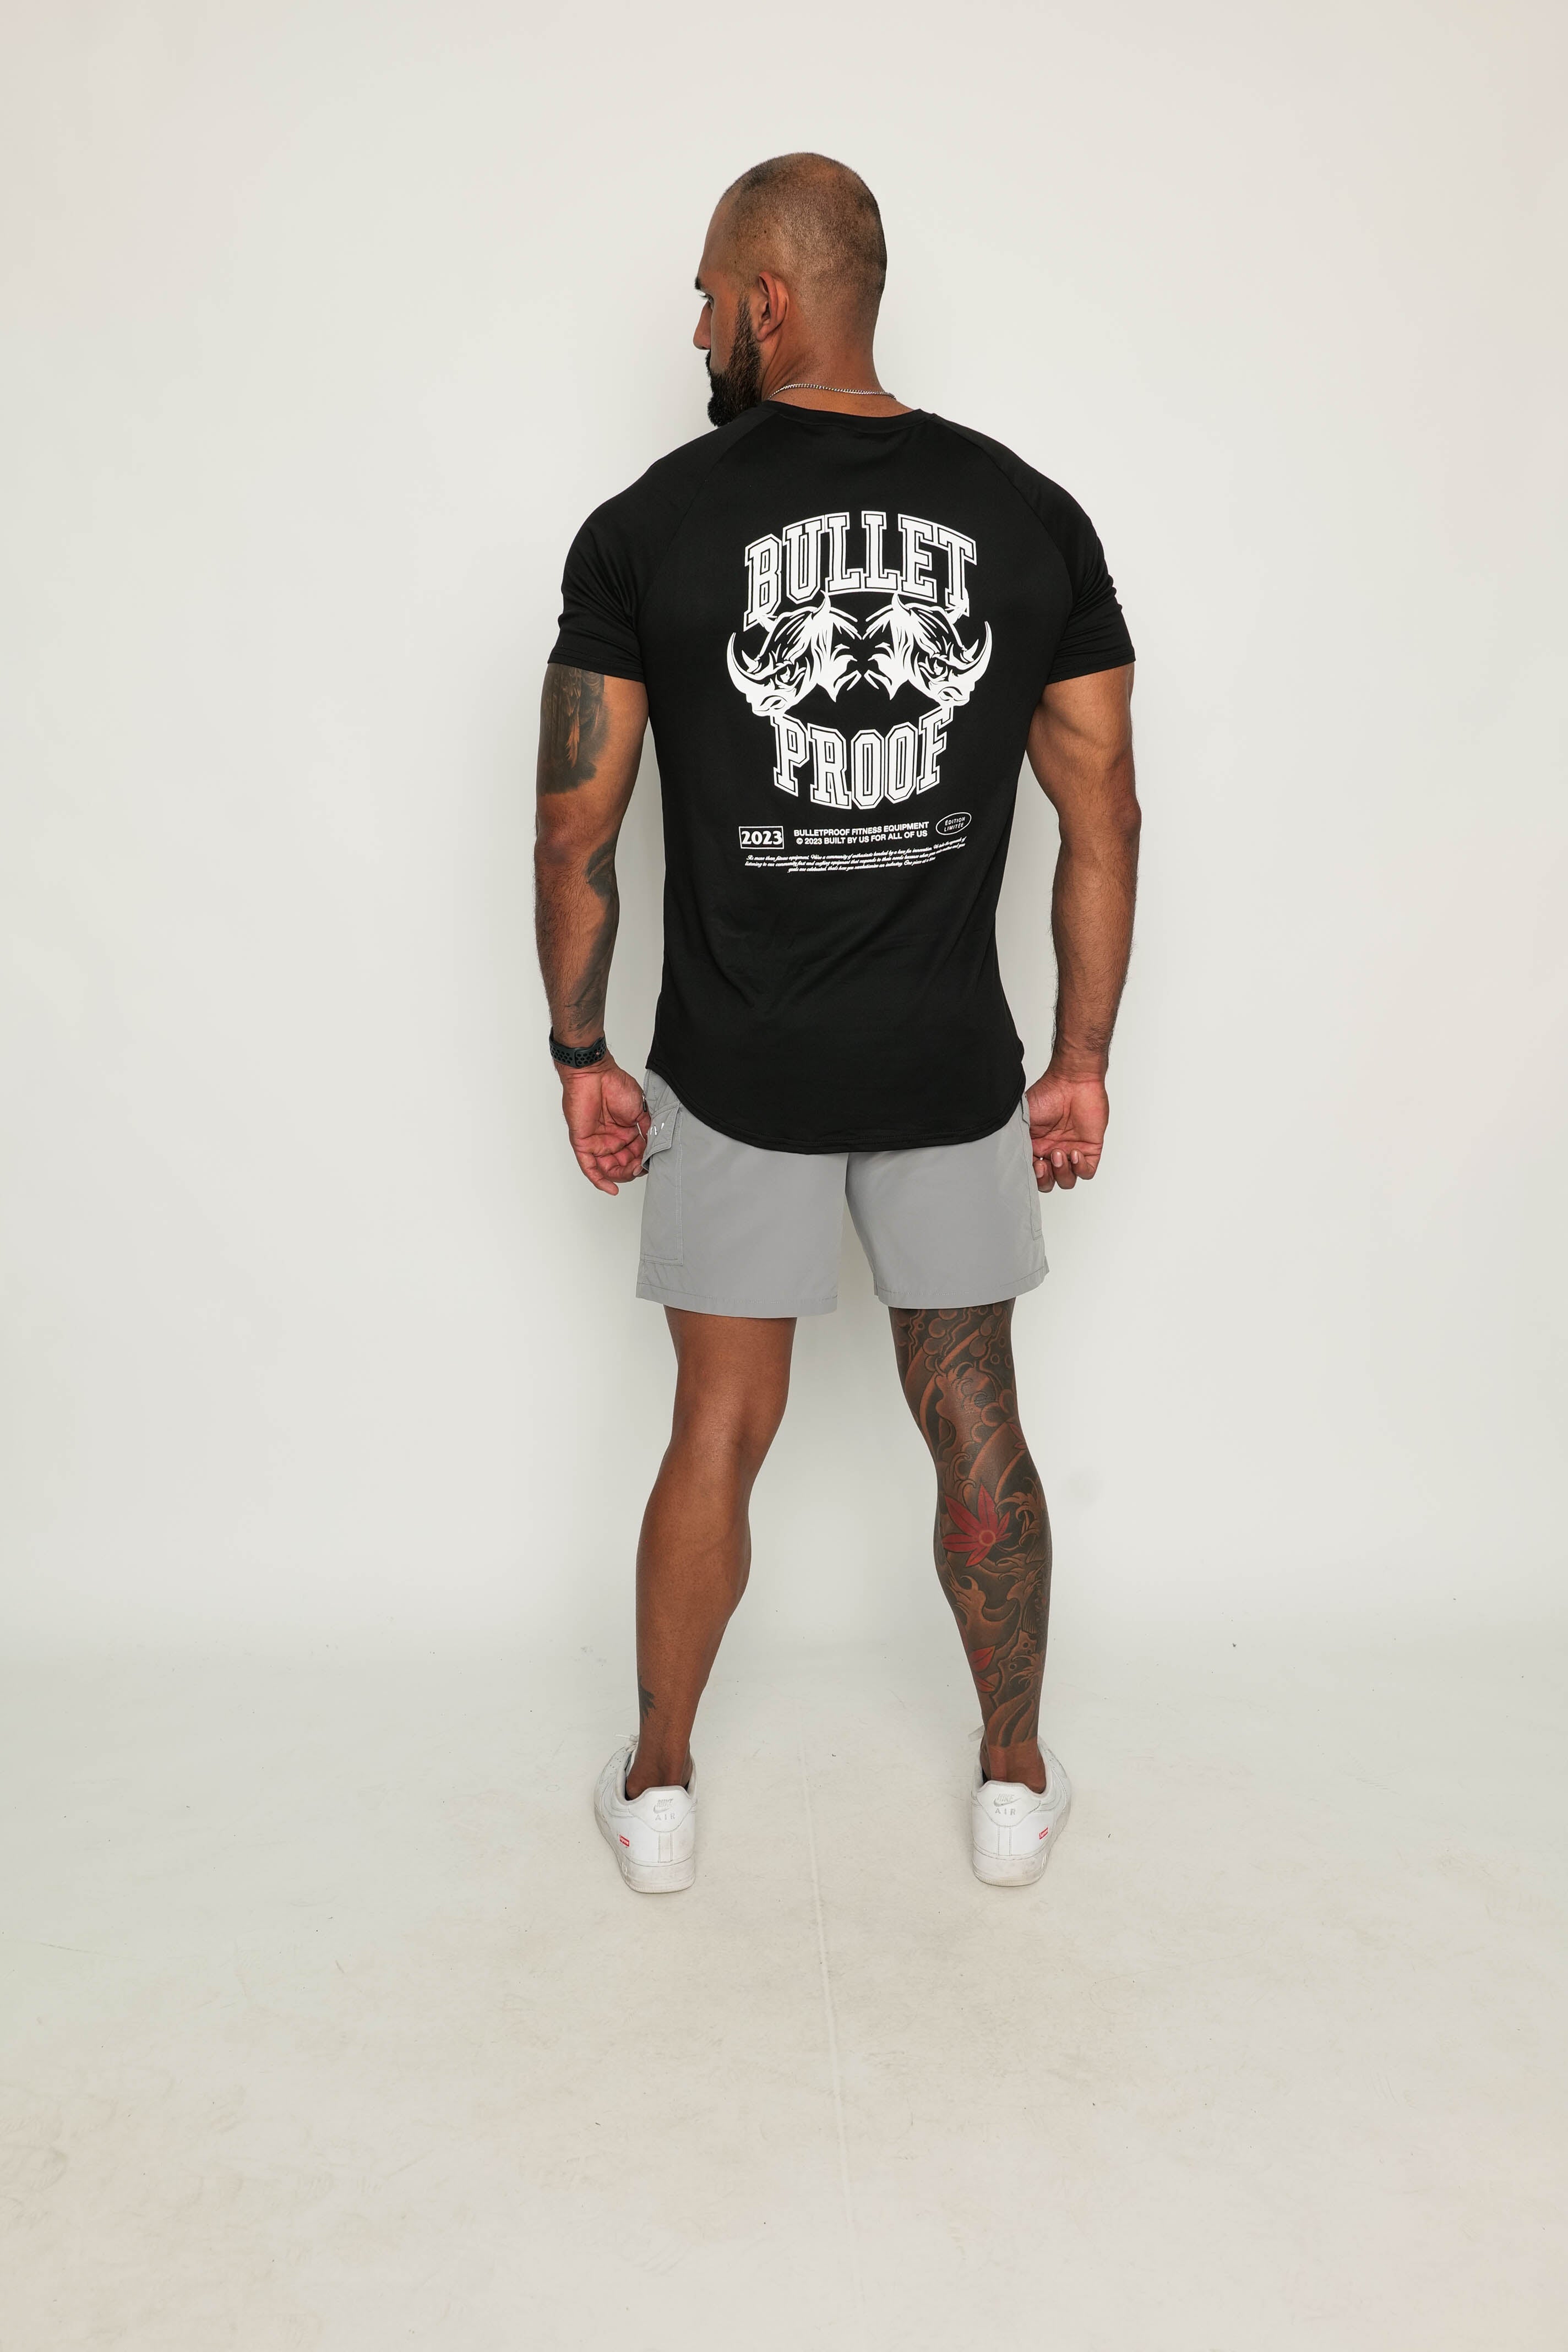 T-SHIRT - Unity Rhino Strength: Built by Us for Us